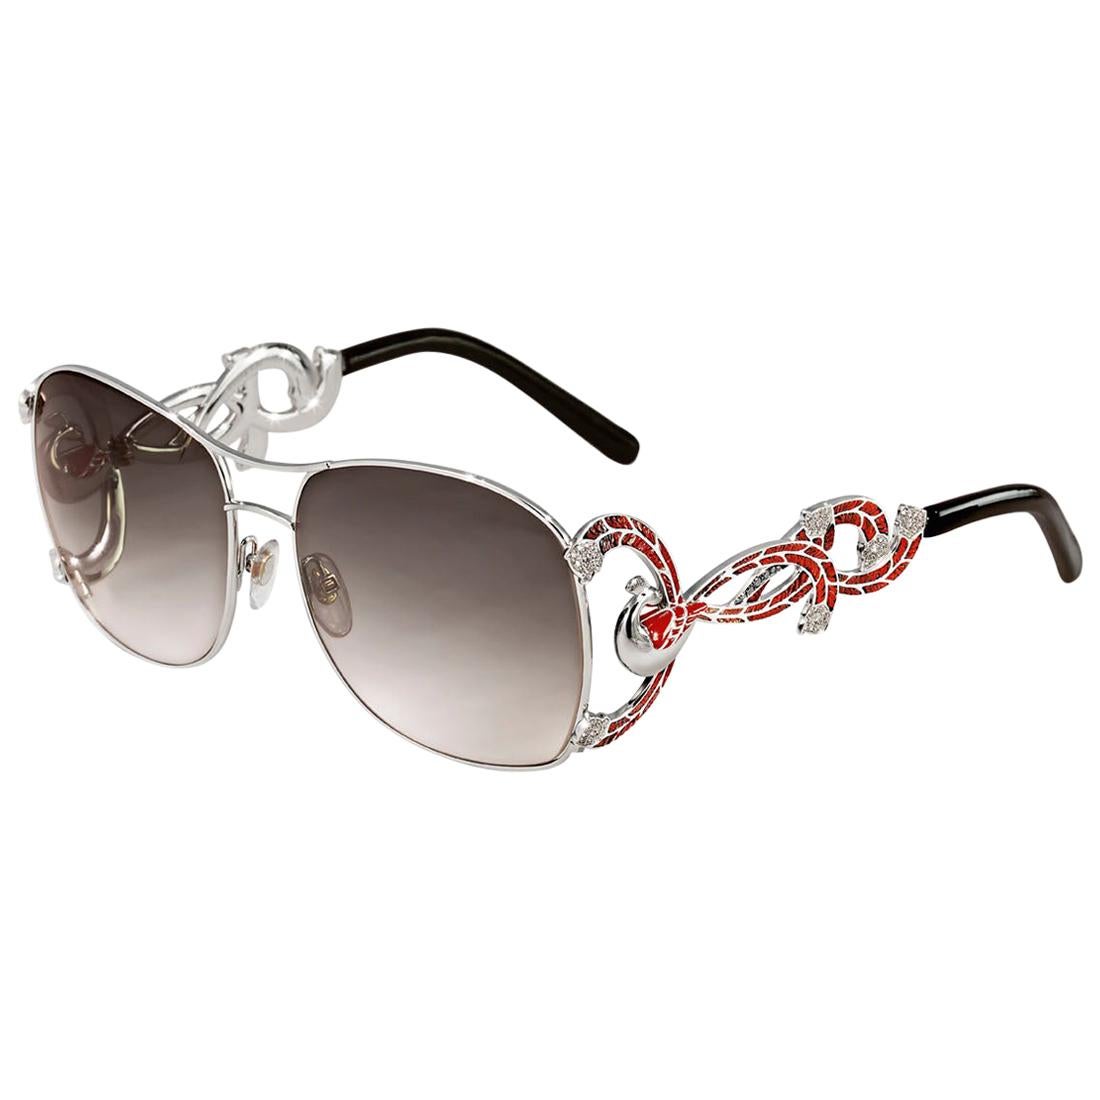 Sunglasses White Gold White and Black Diamonds Hand Decorated with Micro Mosaic